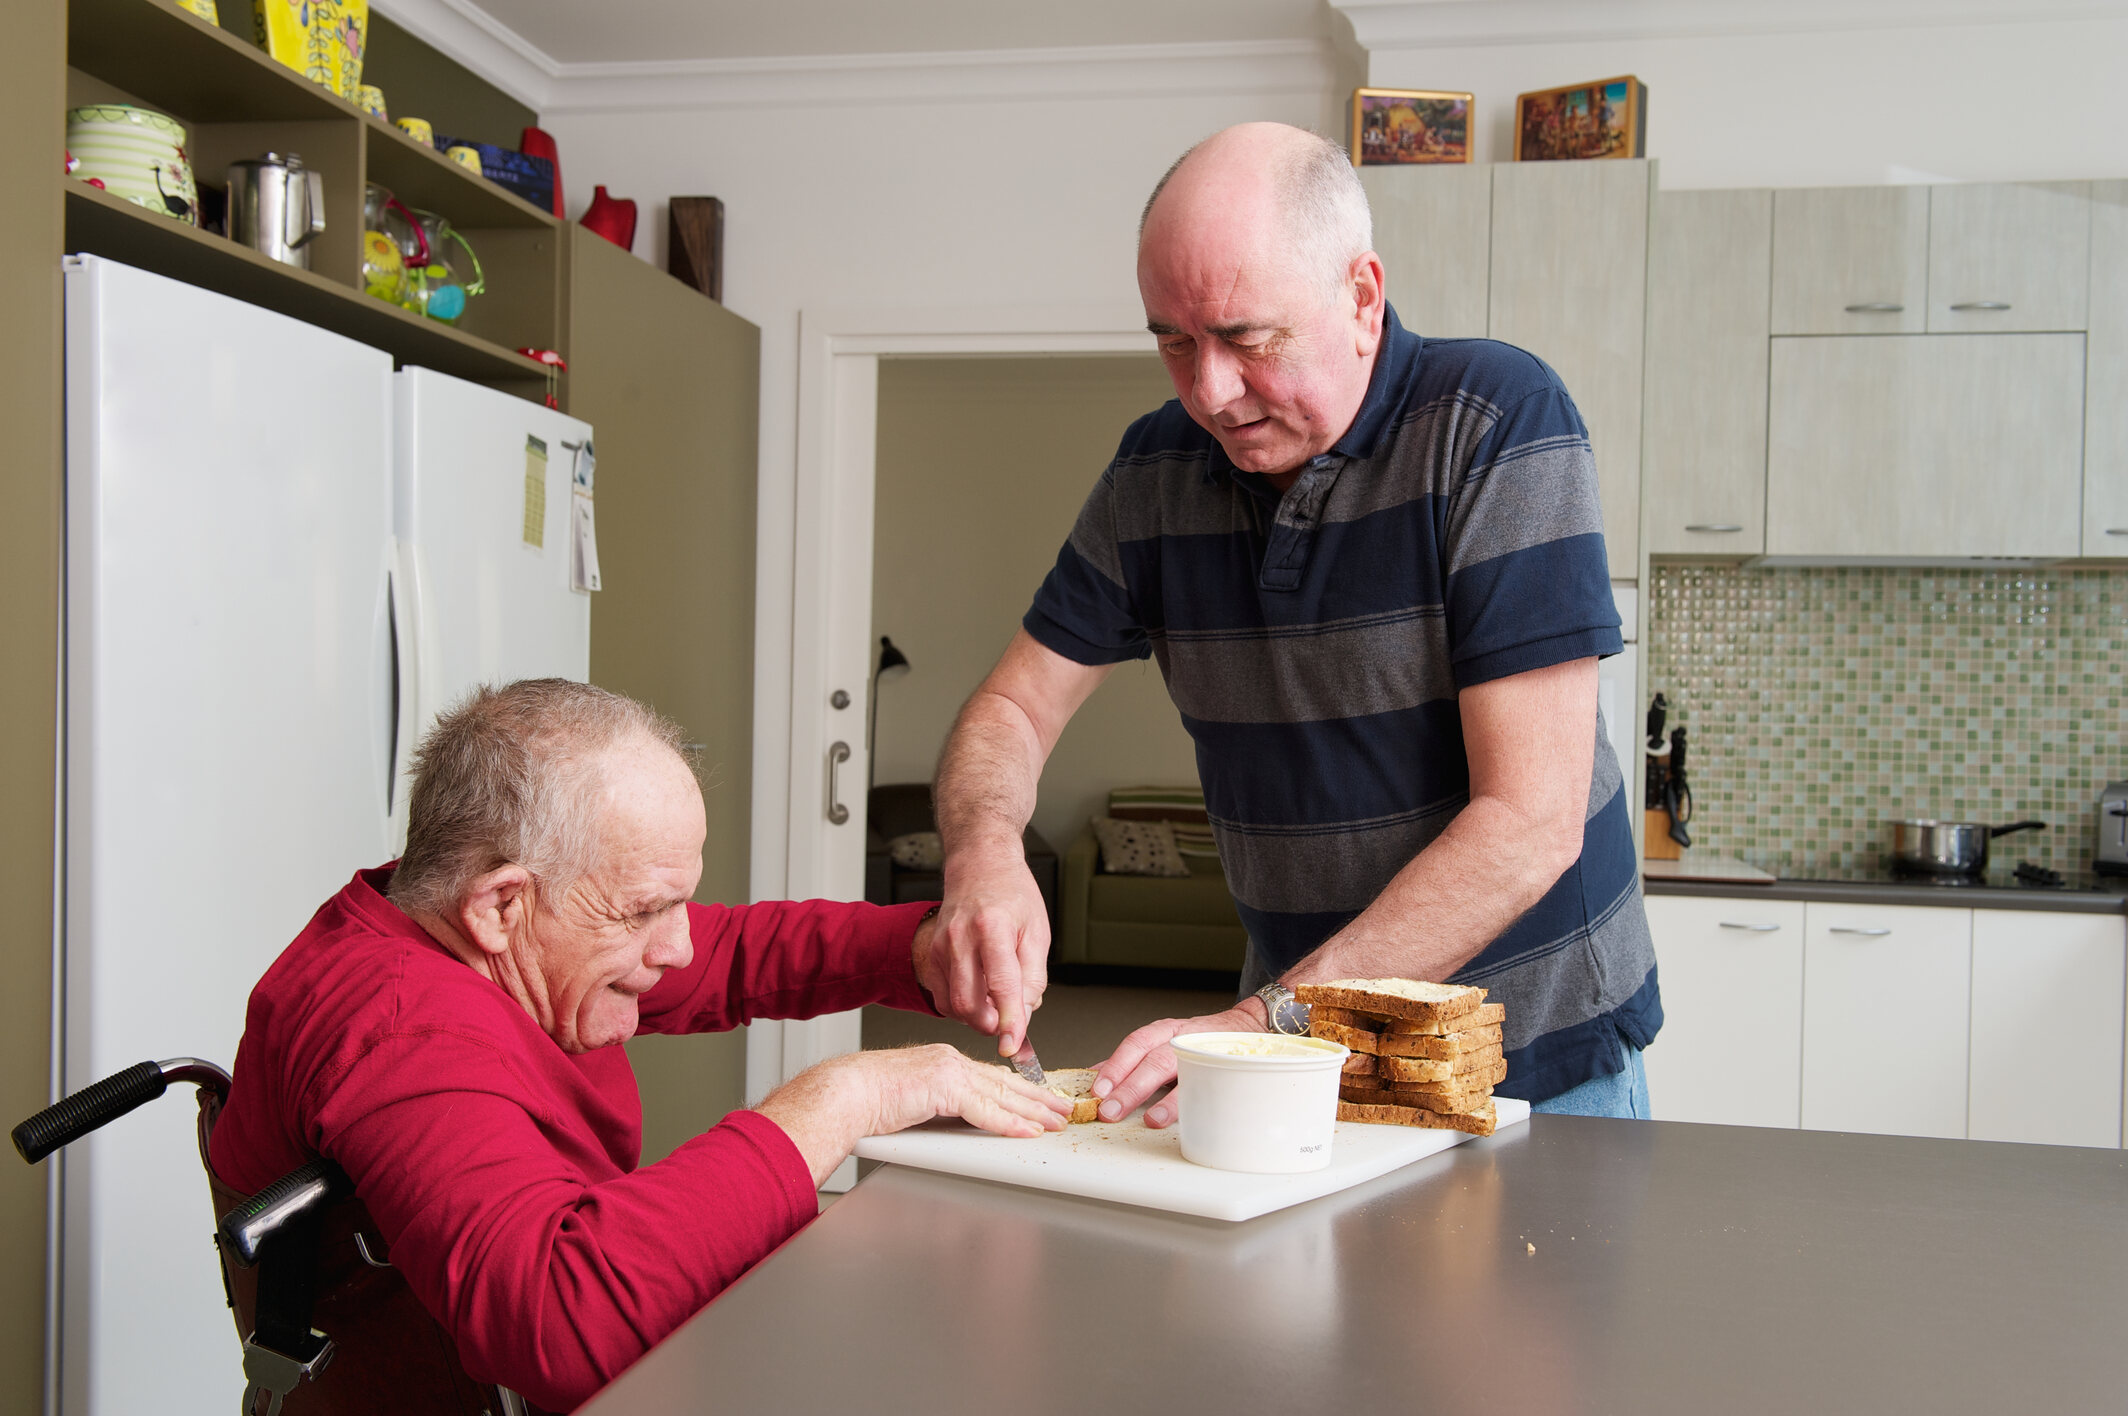 An older physically disabled man getting help making a sandwich in the kitchen.